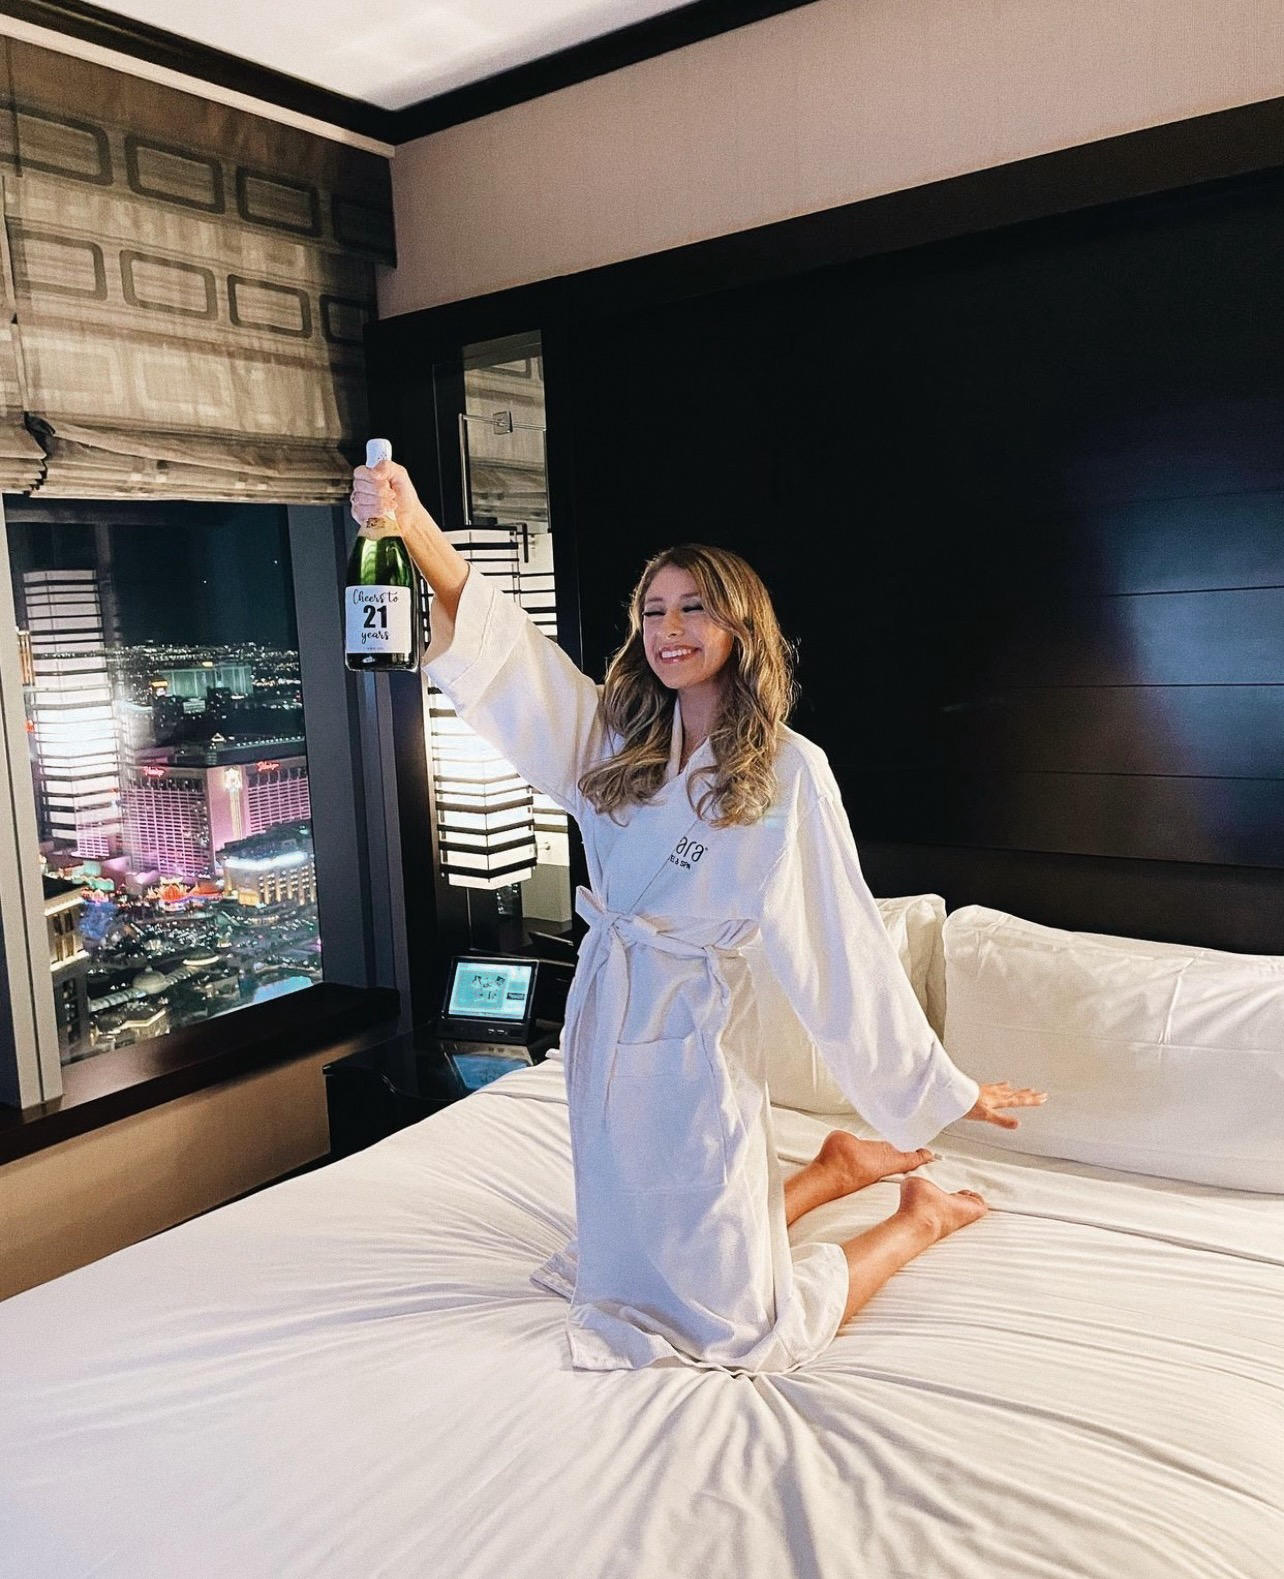 Vdara Hotel & Spa - Embrace life’s special moments